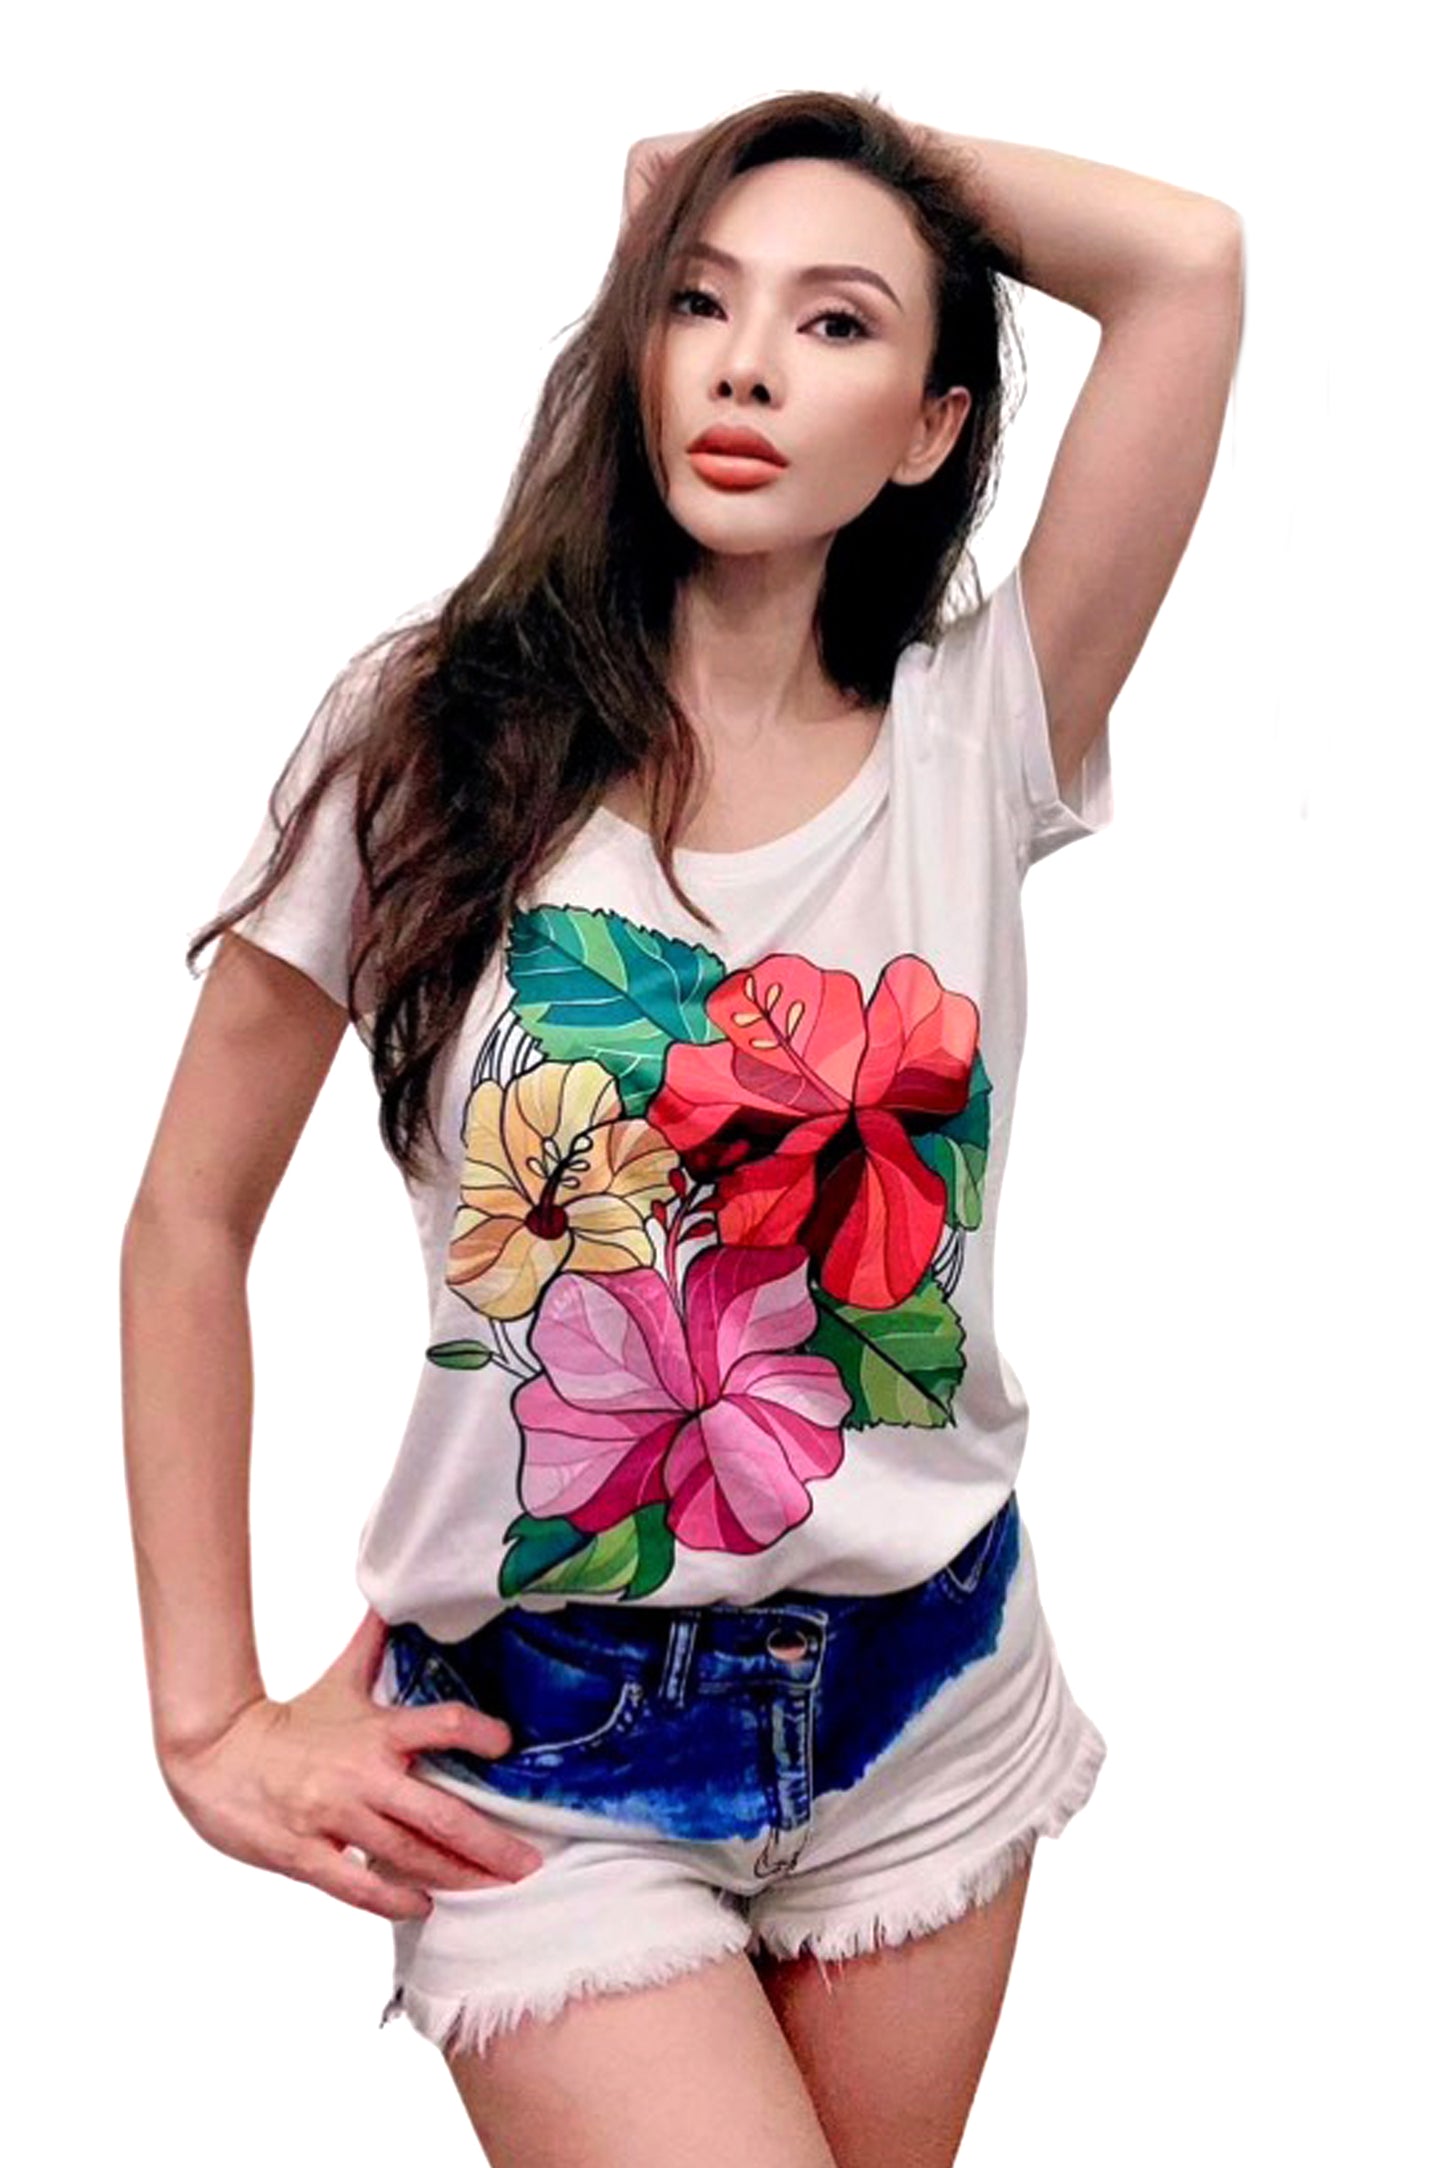 Sunne Tropical Women Top Tee White Loose Fit T-Shirt - Super Soft Light Weight Polyester Spandex - Hawaiian Hibiscus Chaba